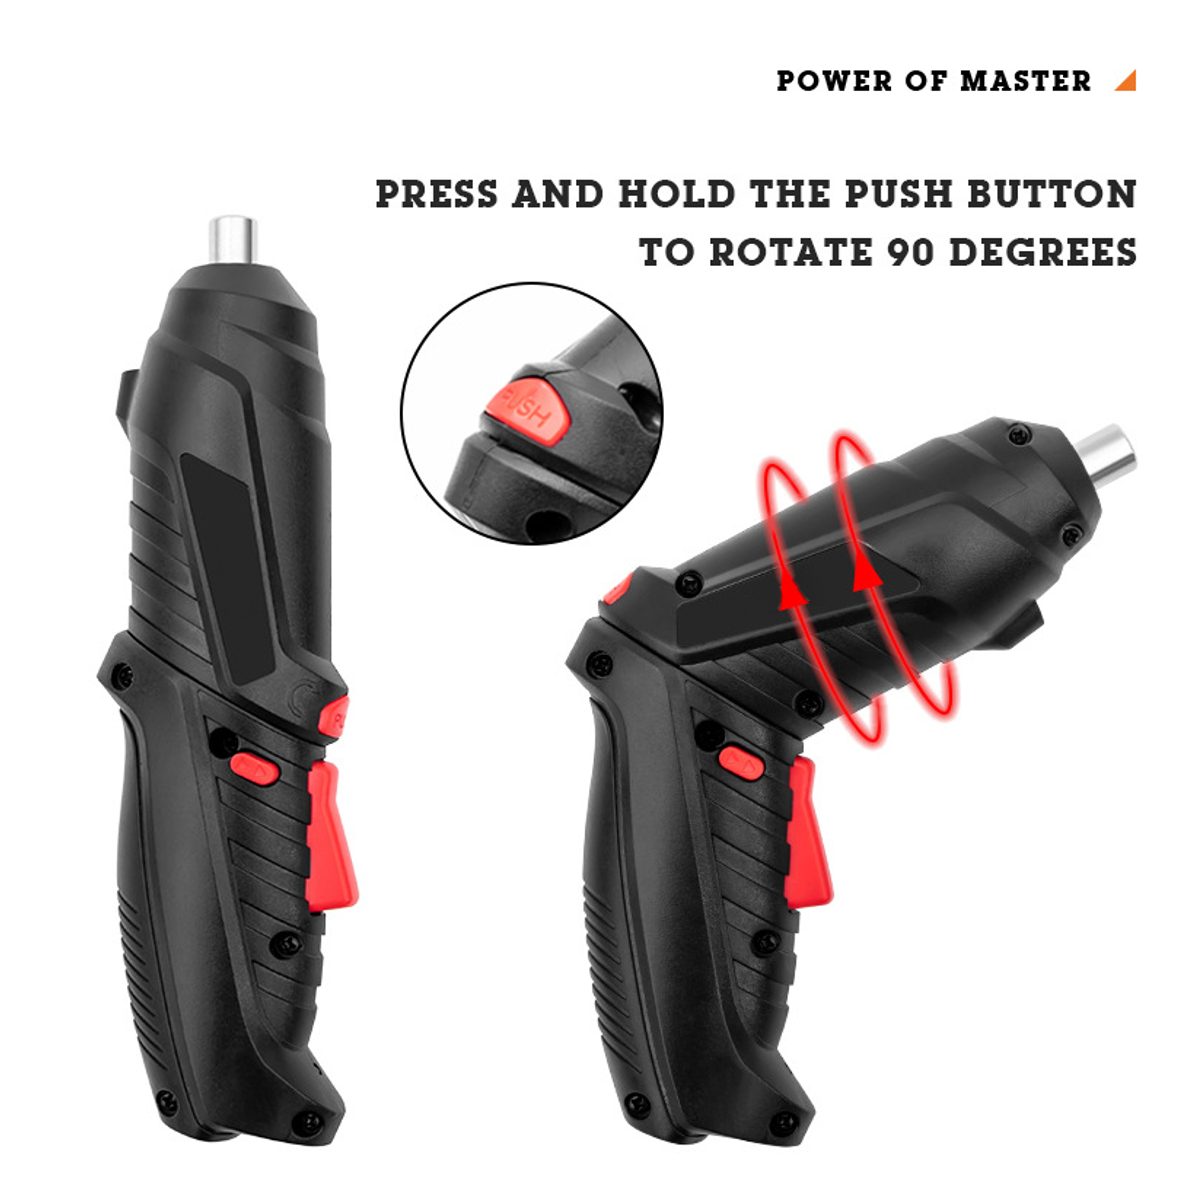 47-in-1-Rechargeable-Wireless-Cordless-Electric-Screwdriver-Drill-Kit-Power-Tool-Home-Improvement-DI-1780811-7